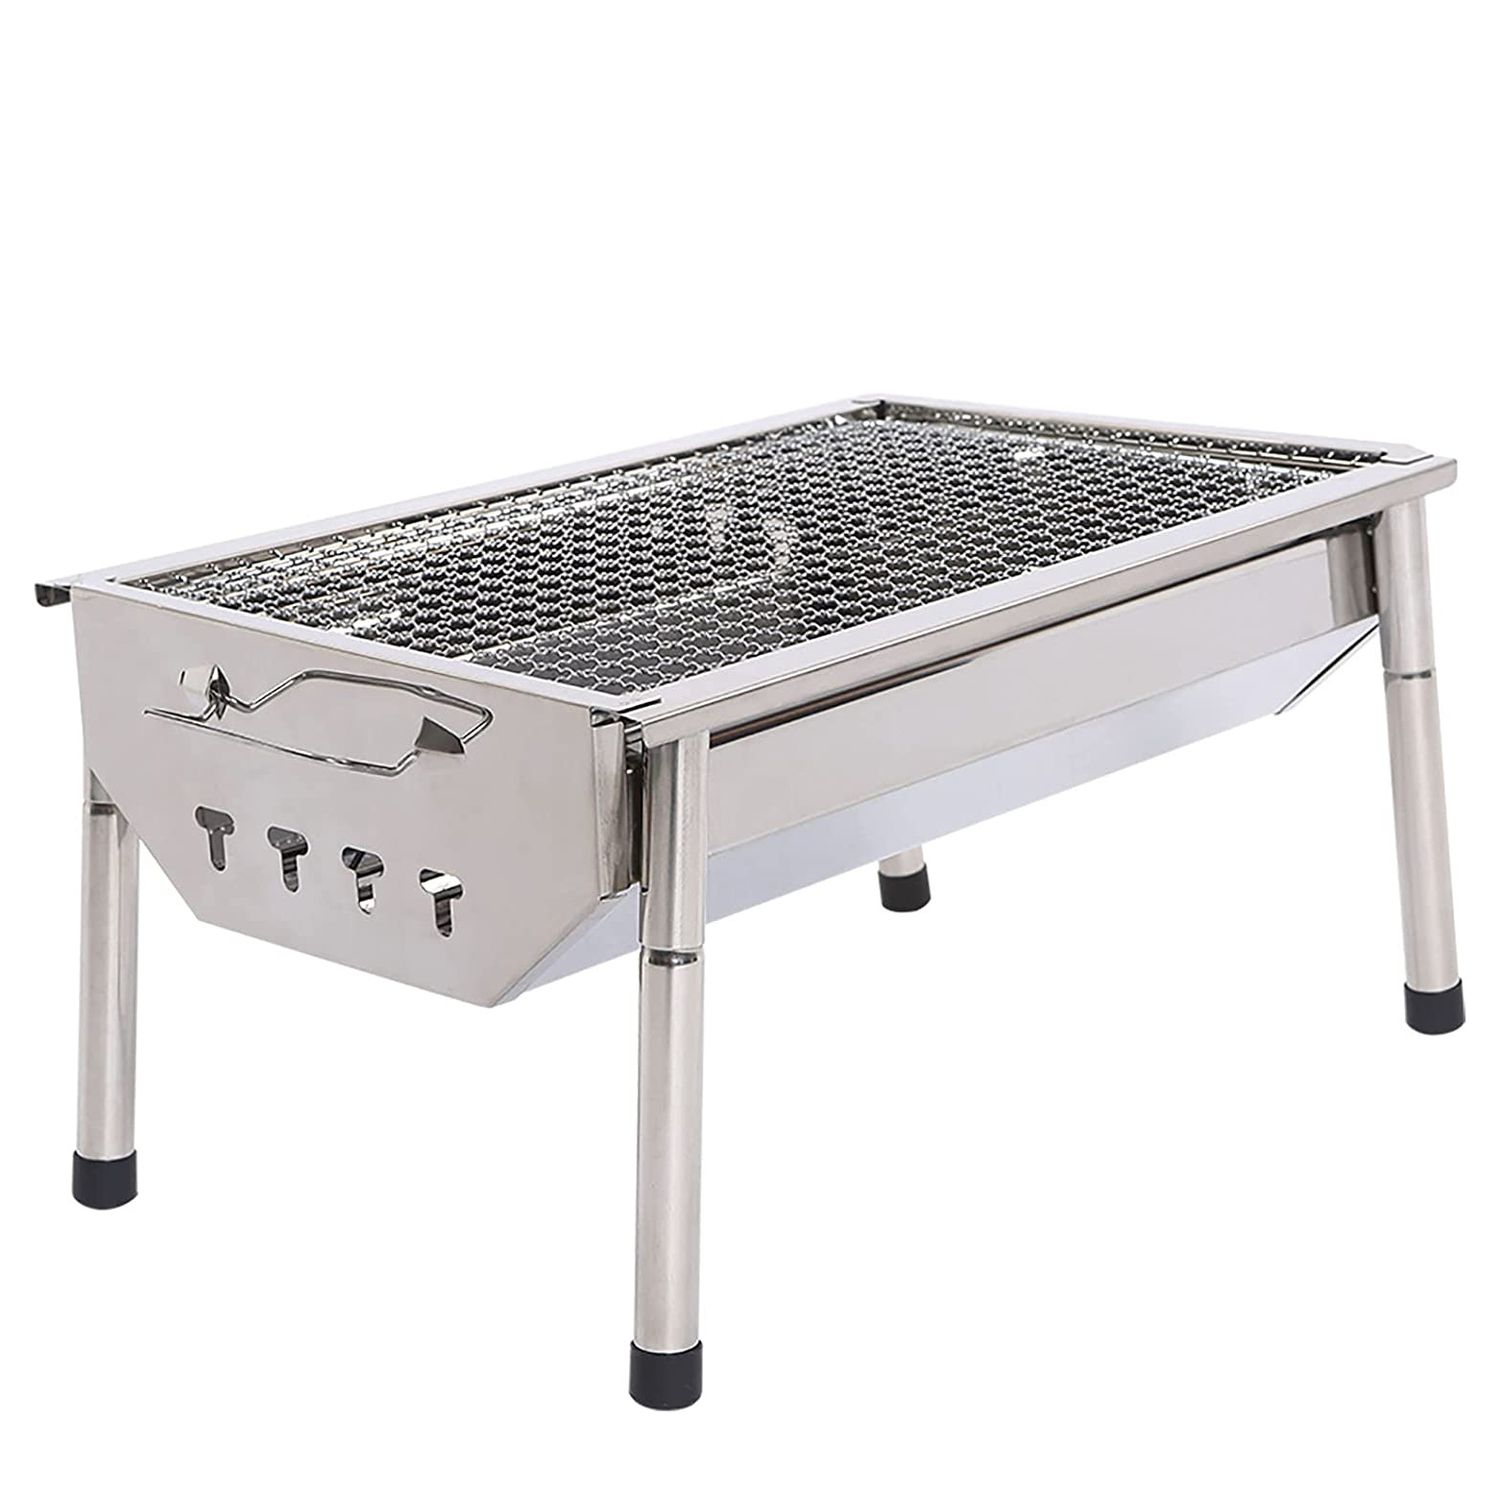 18 " Thai Charcoal Street Stainless Steel Satay Barbecue Grill Sea Food New 